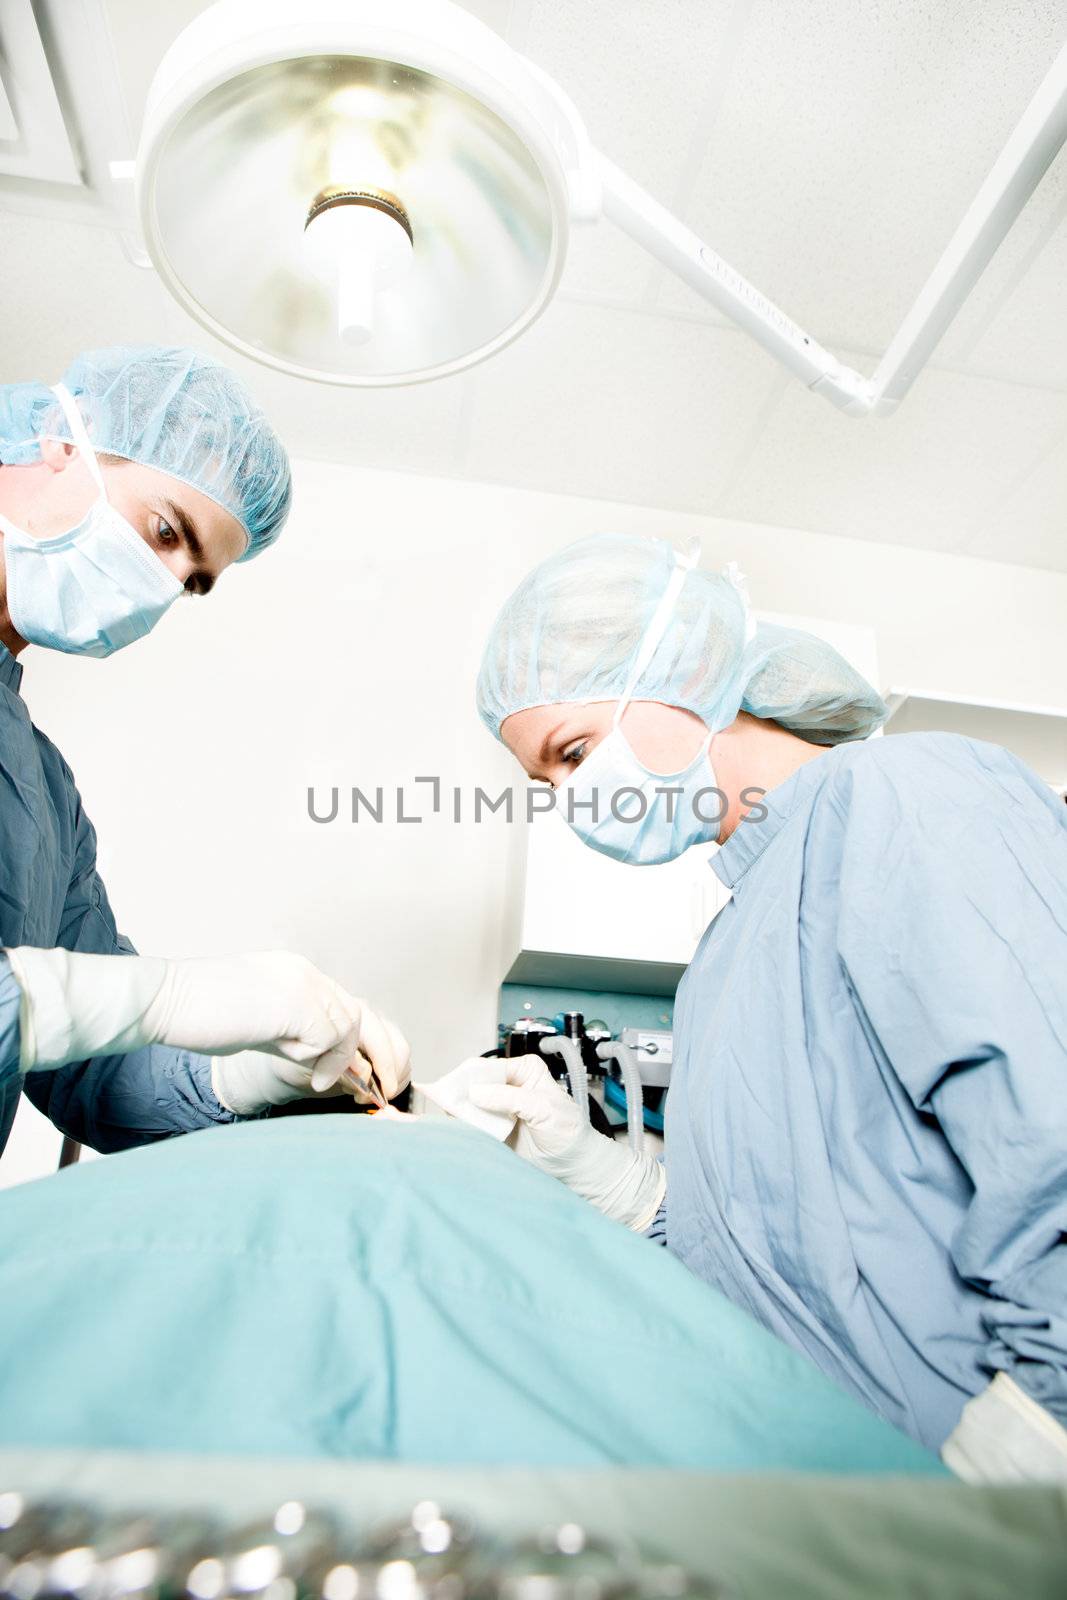 A surgeon working in a small operating room with an assistant